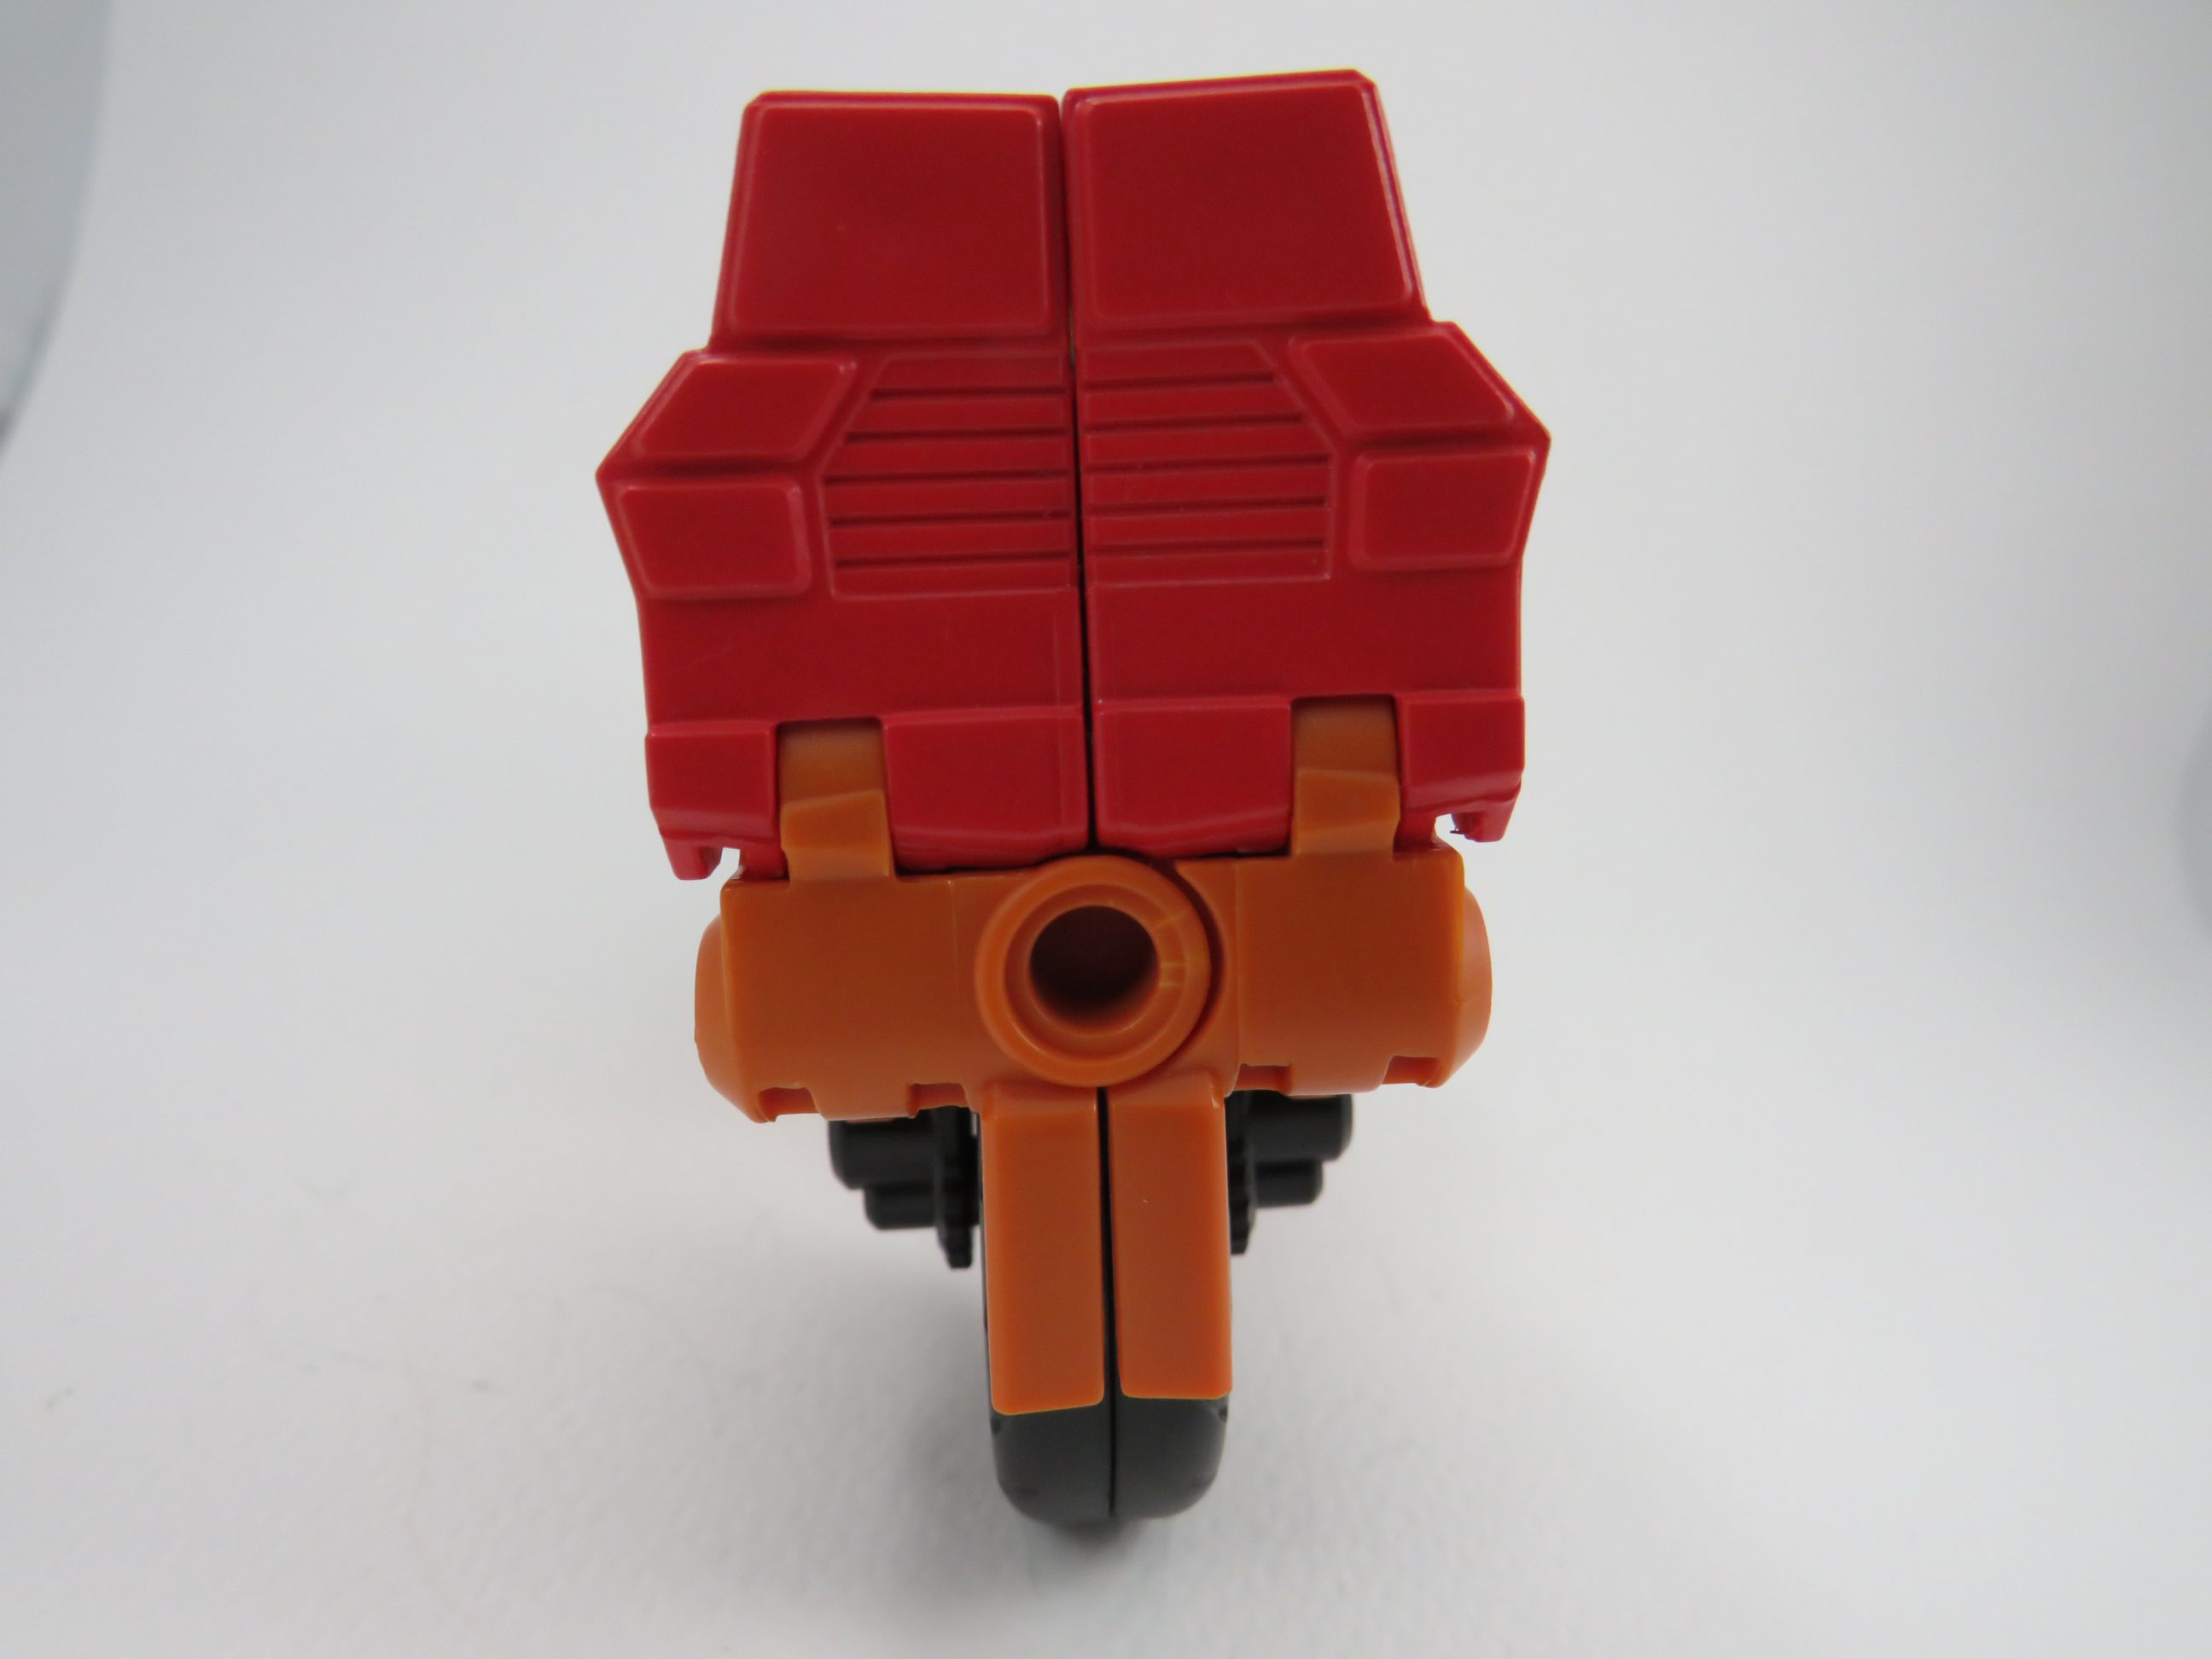 Alternate mode (Afterbreaker from the Computron gift set)